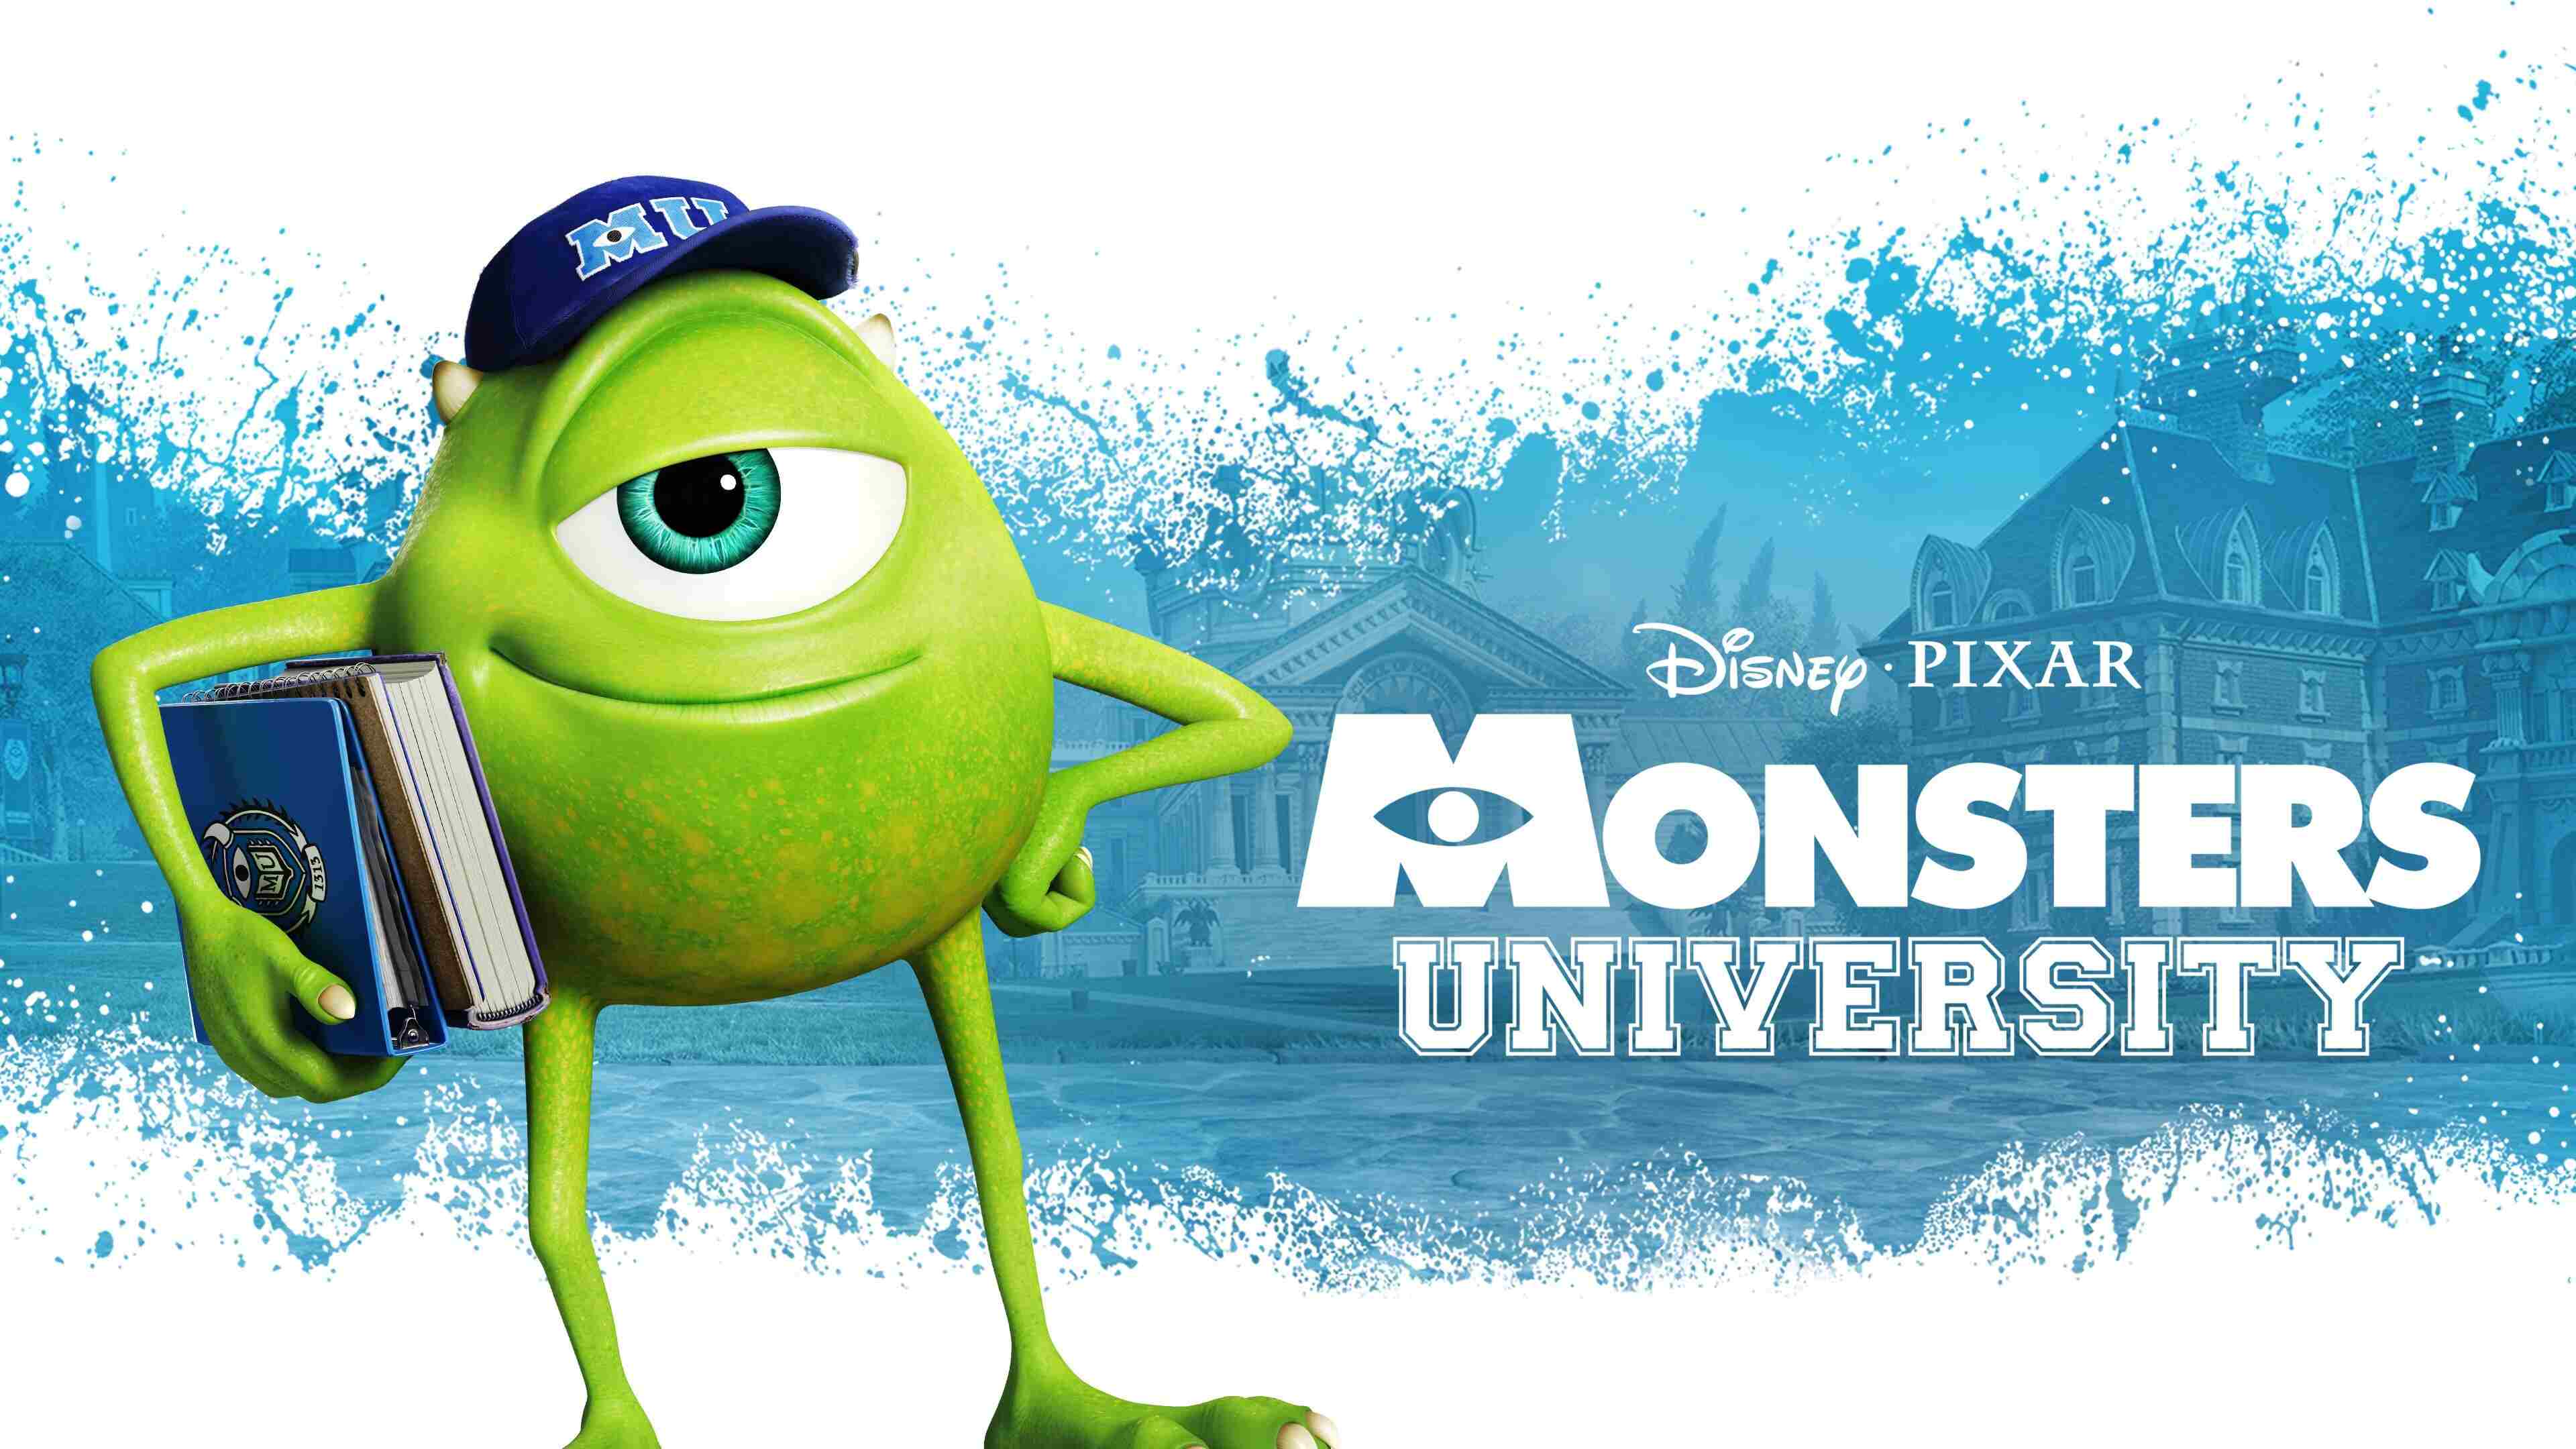 38-facts-about-the-movie-monsters-university